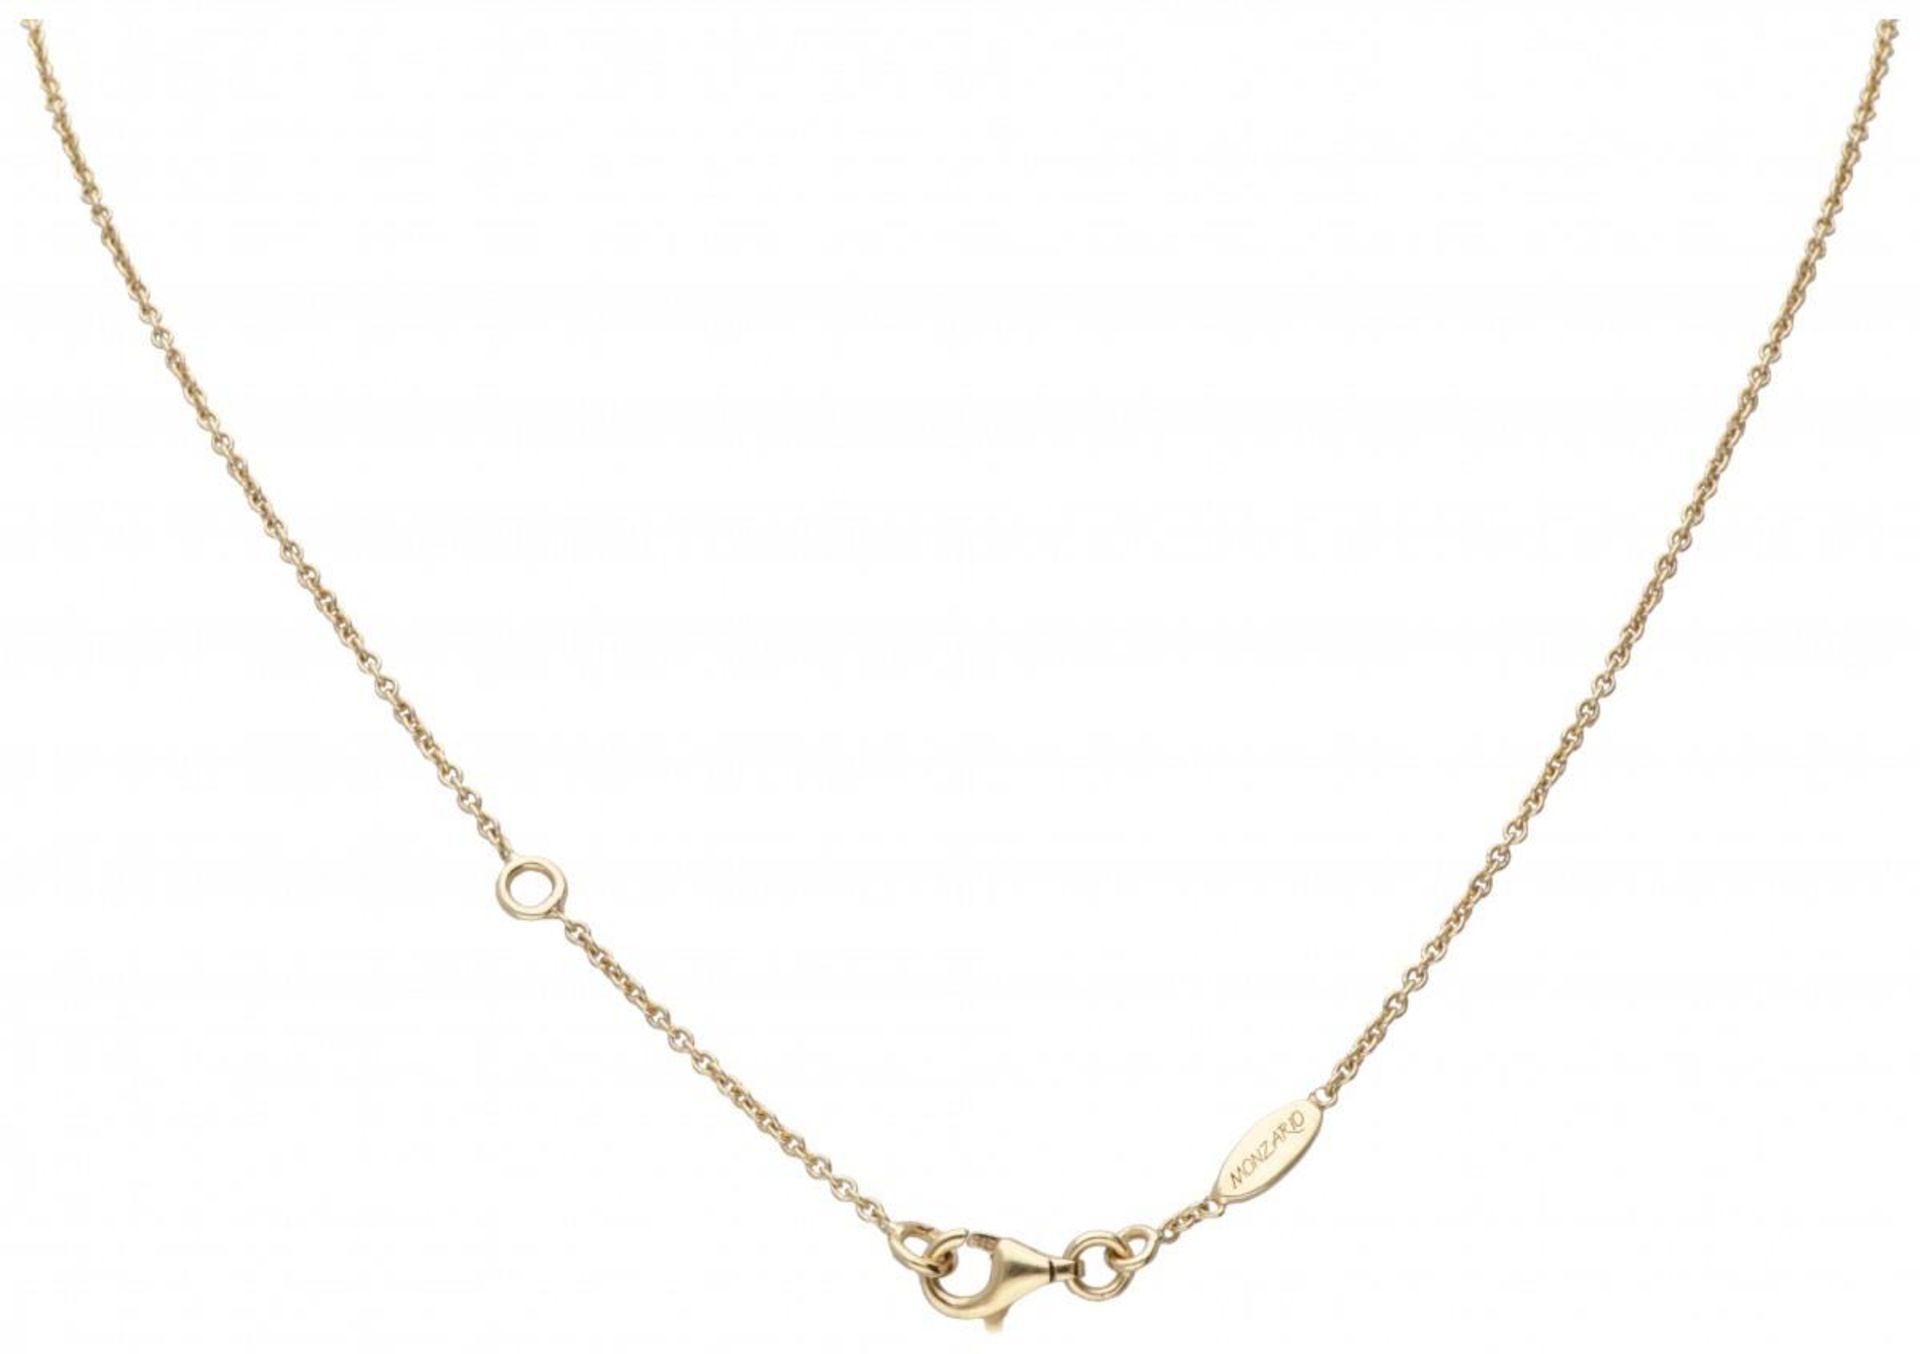 14K. Yellow gold Monzario link necklace set with approx. 9.60 ct. natural sapphire. - Image 3 of 4